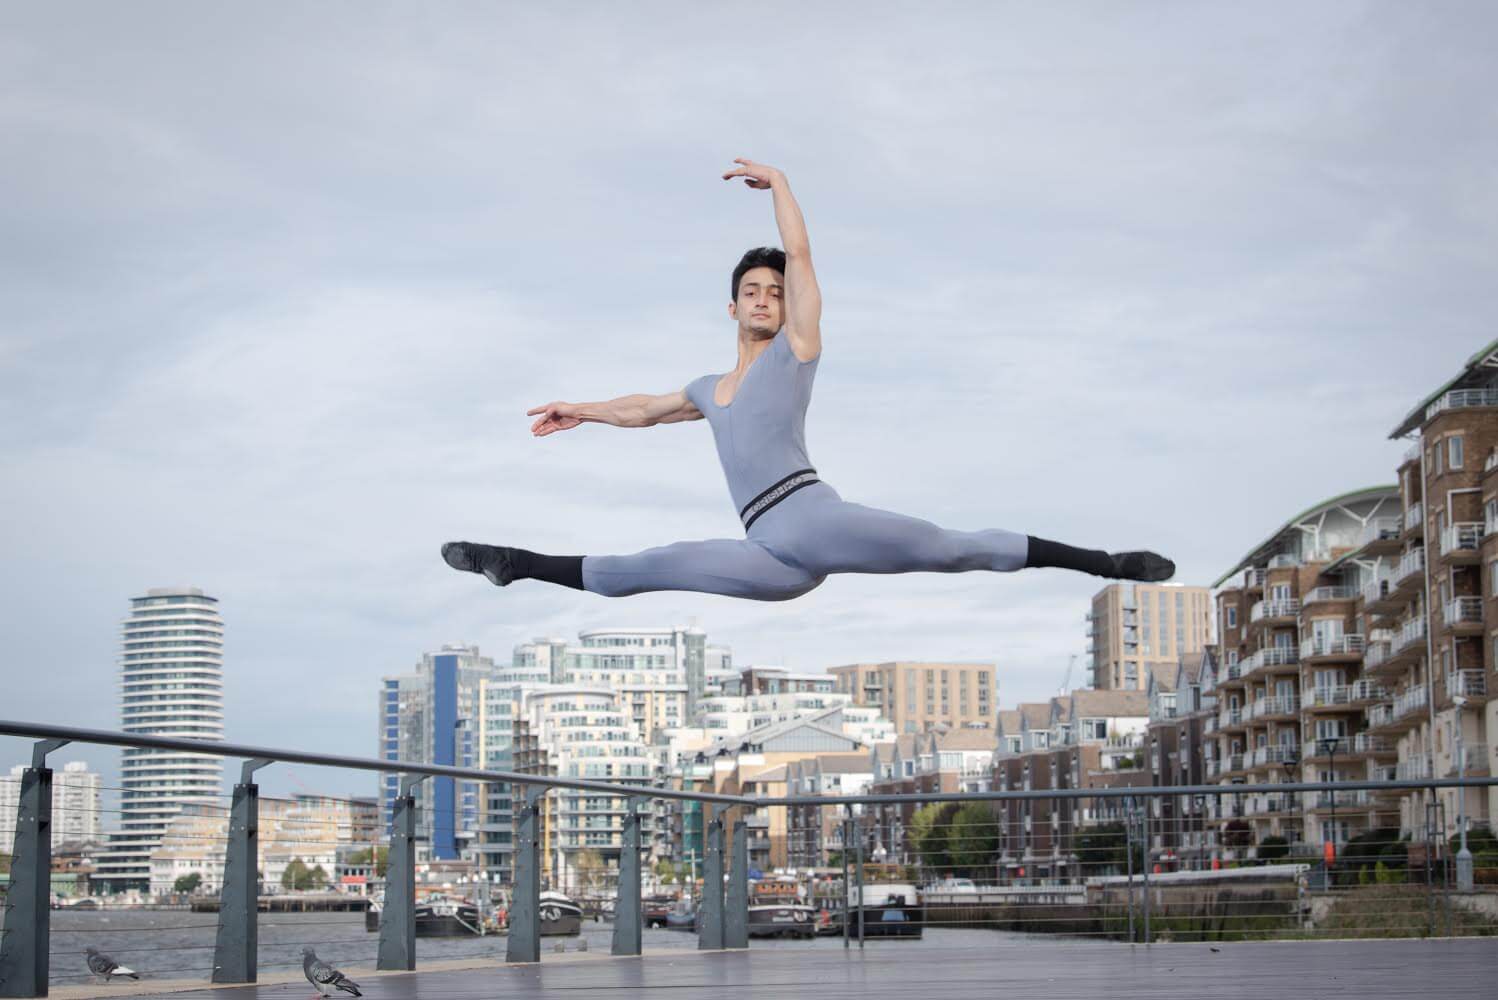 Meet India’s ‘Billy Elliot’ at the English National Ballet School